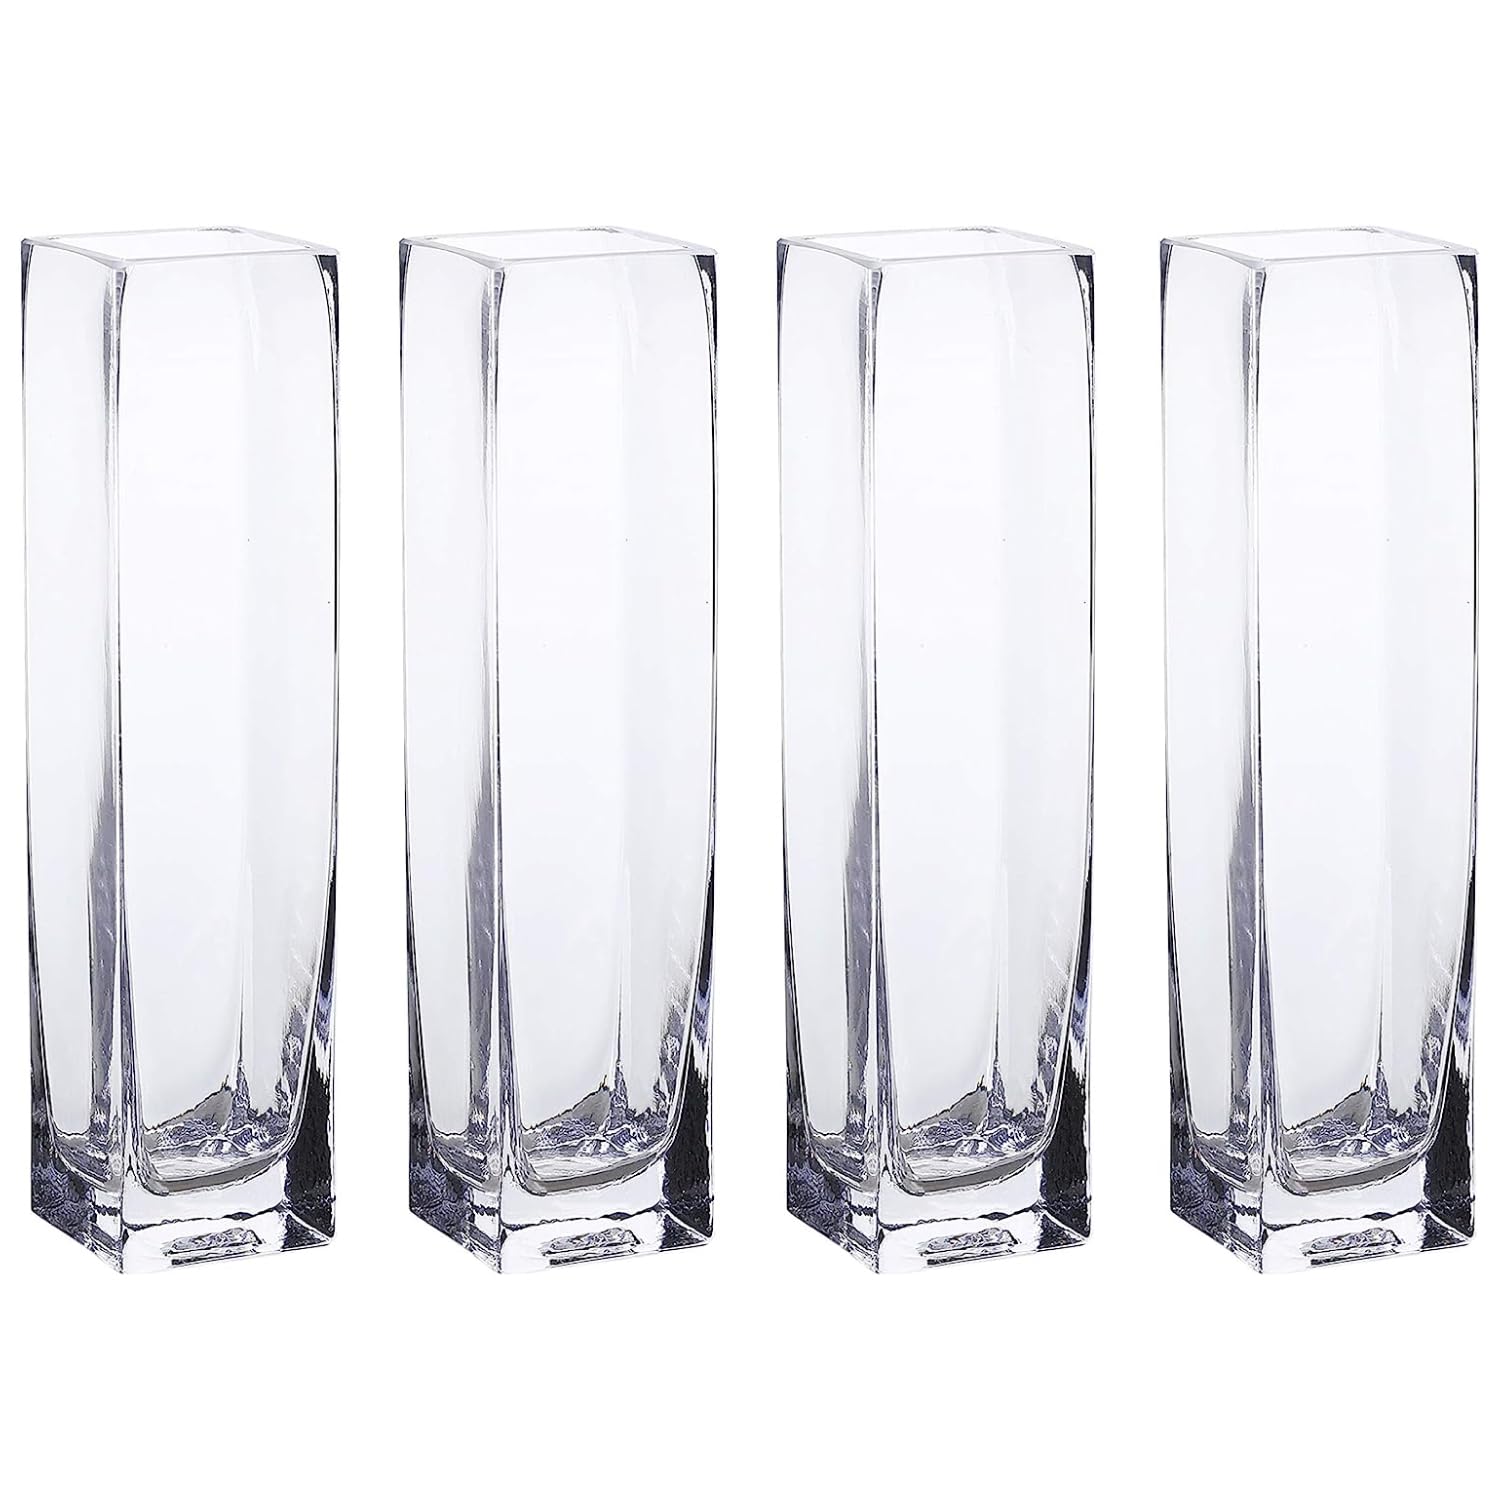 WHOLE HOUSEWARES Clear Glass Vase | Tall Square Block Vase | Centerpiece Arrangement for Wedding Party Event Home Office Decor | (Diameter 2.35 X Height 10)